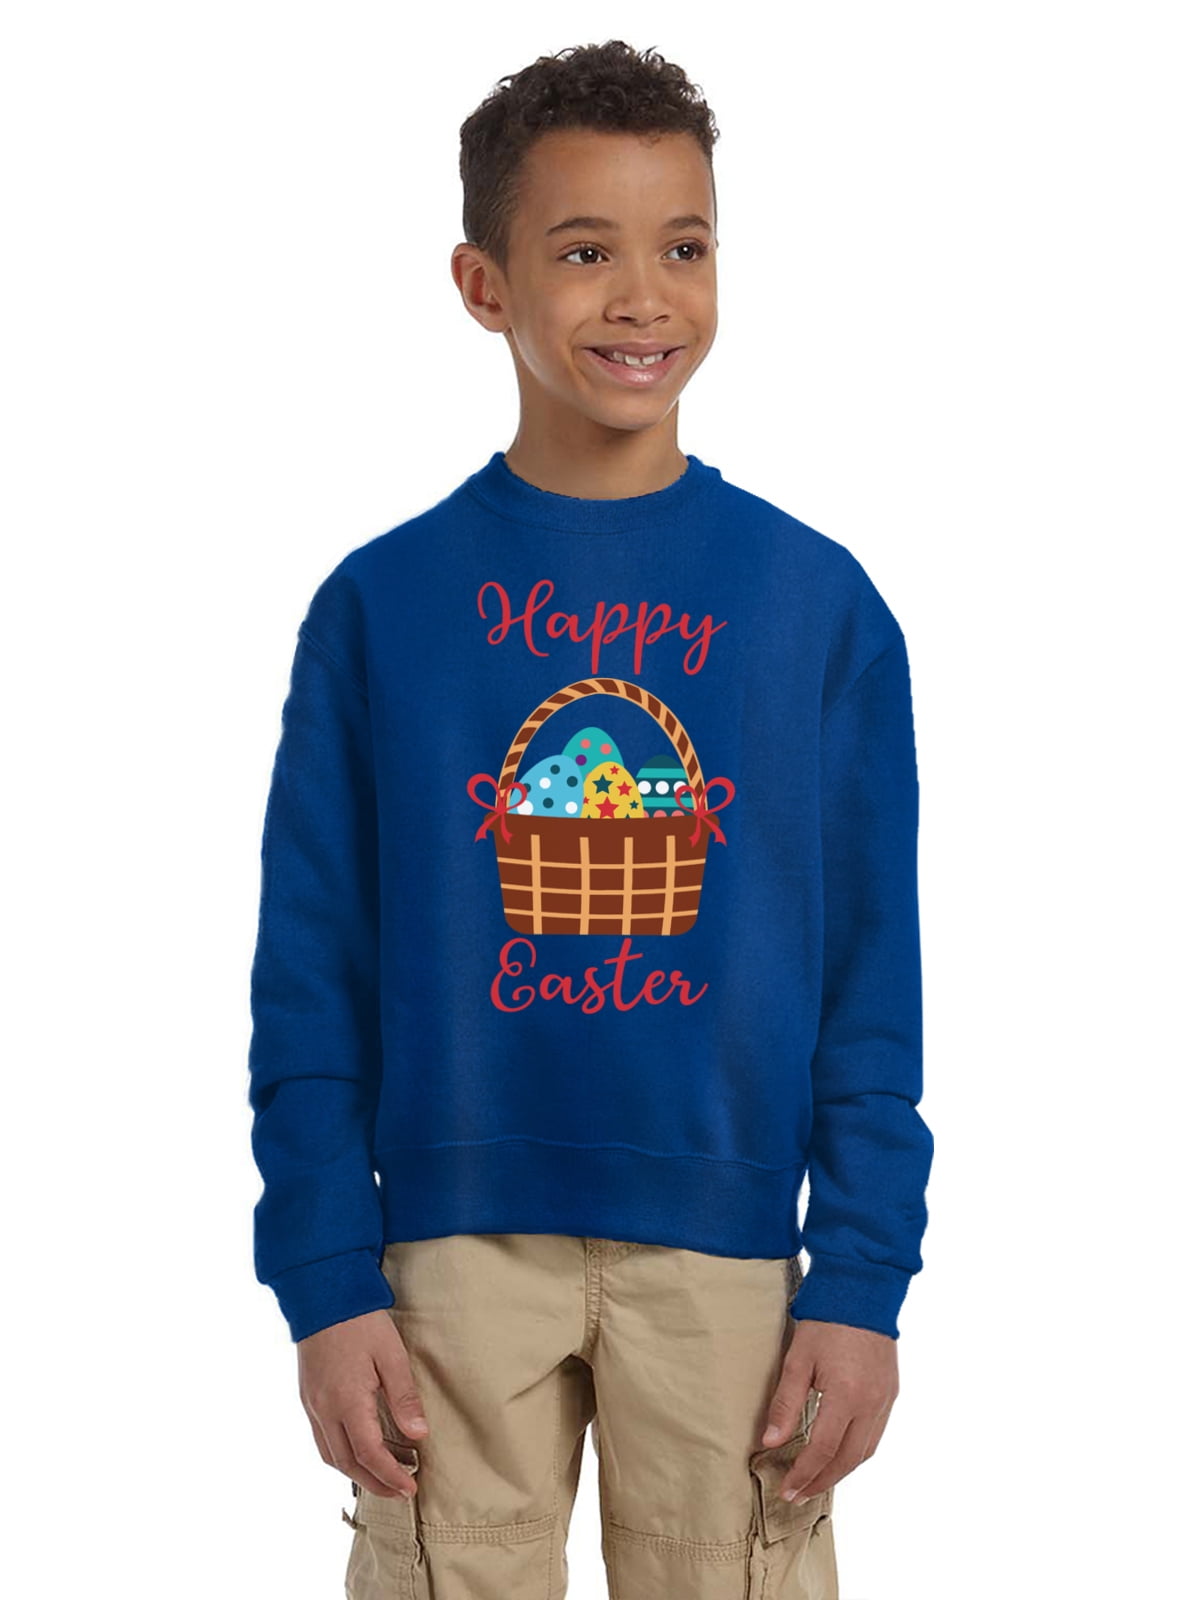 Happy Easter Basket Easter Sweatshirt for Kids Sweater - Youth S M L XL - Christian Holiday Easter Tee for Boys for Girls - Walmart.com